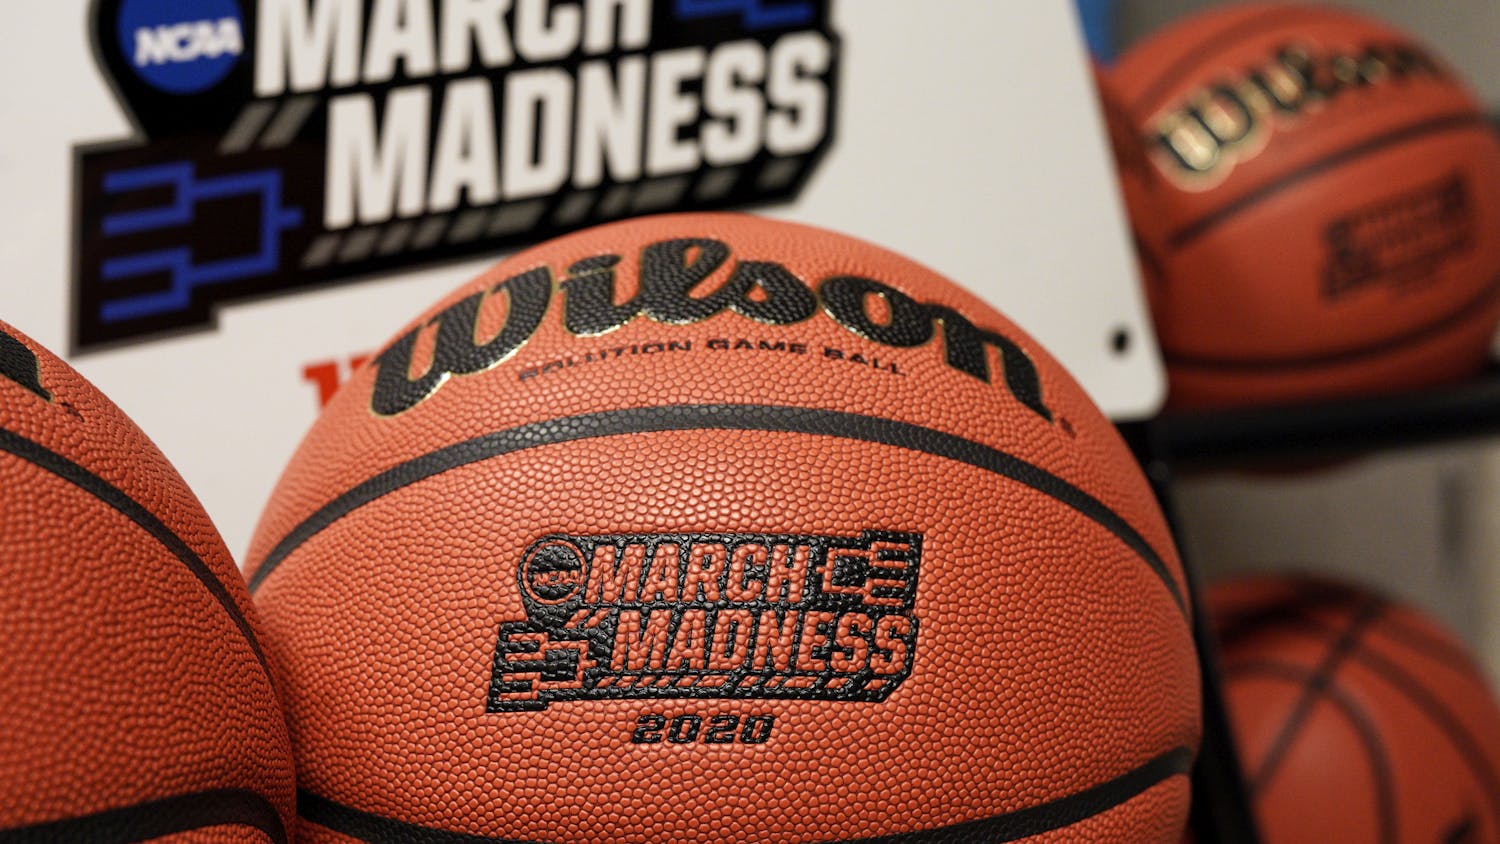 Official March Madness 2020 tournament basketballs are seen in a store room at the CHI Health Center Arena, in Omaha, Neb., Monday, March 16, 2020. Omaha was to host a first and second round in the NCAA college basketball Division I tournament, which was canceled due to the coronavirus pandemic.